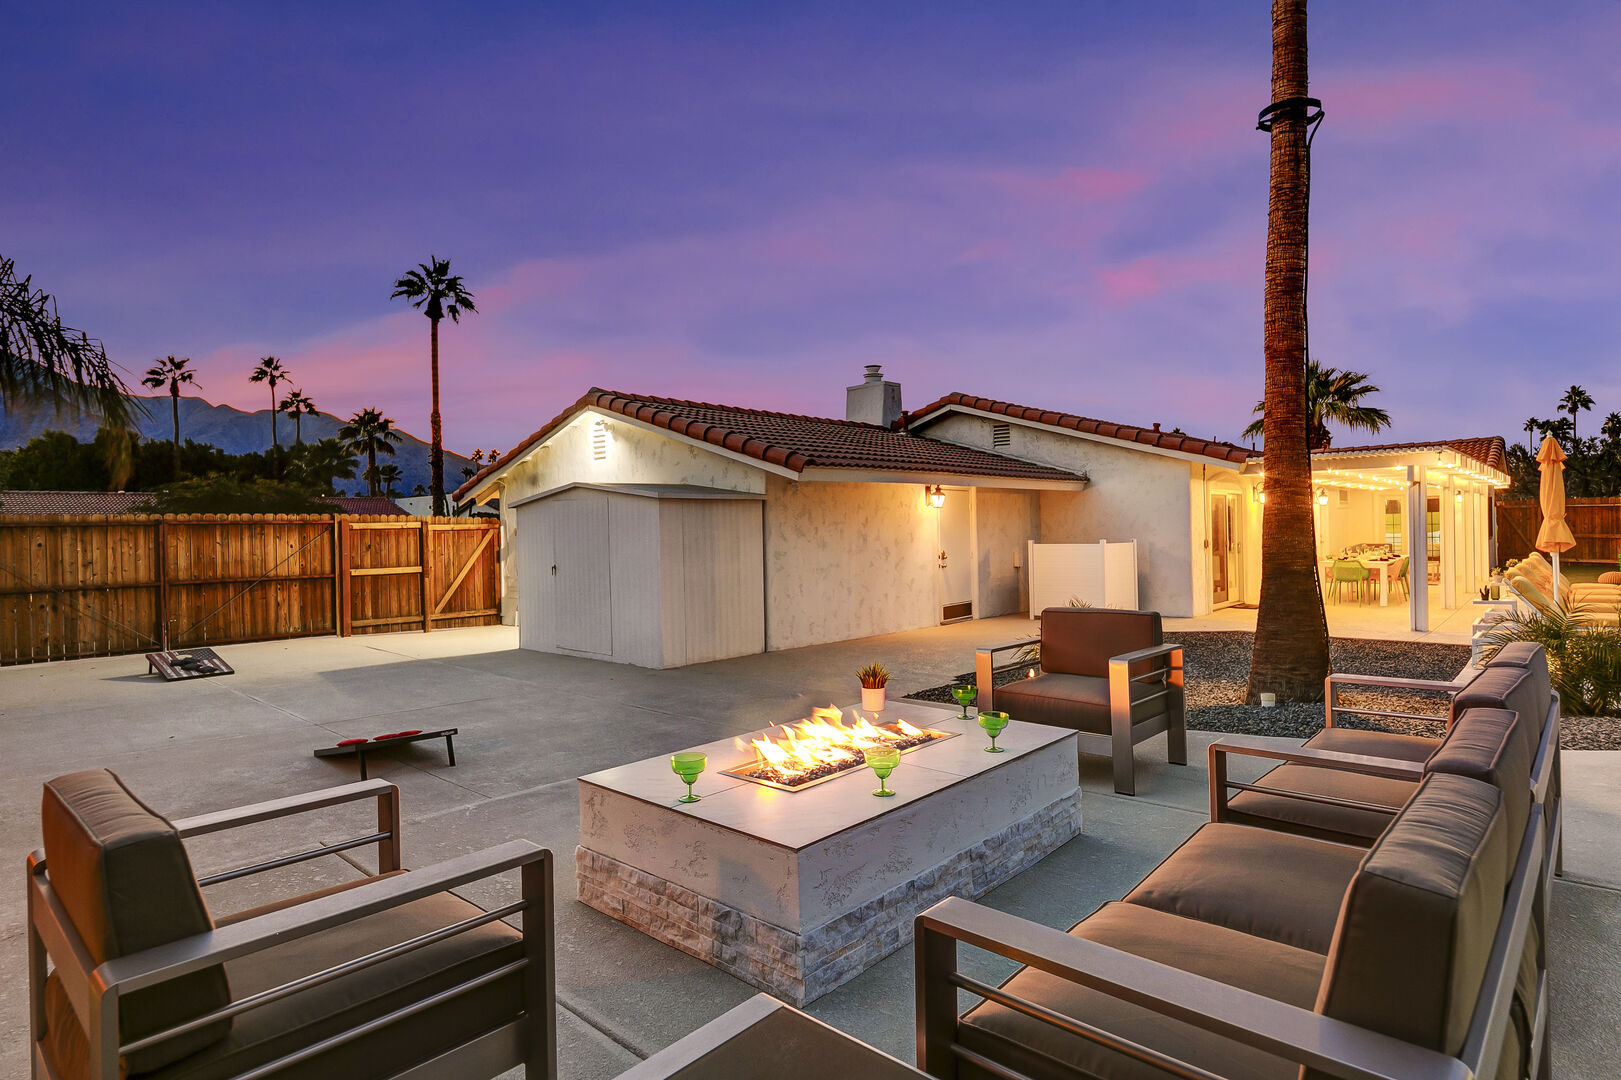 The elevated gas fire pit means no propane tanks running out during your stay.